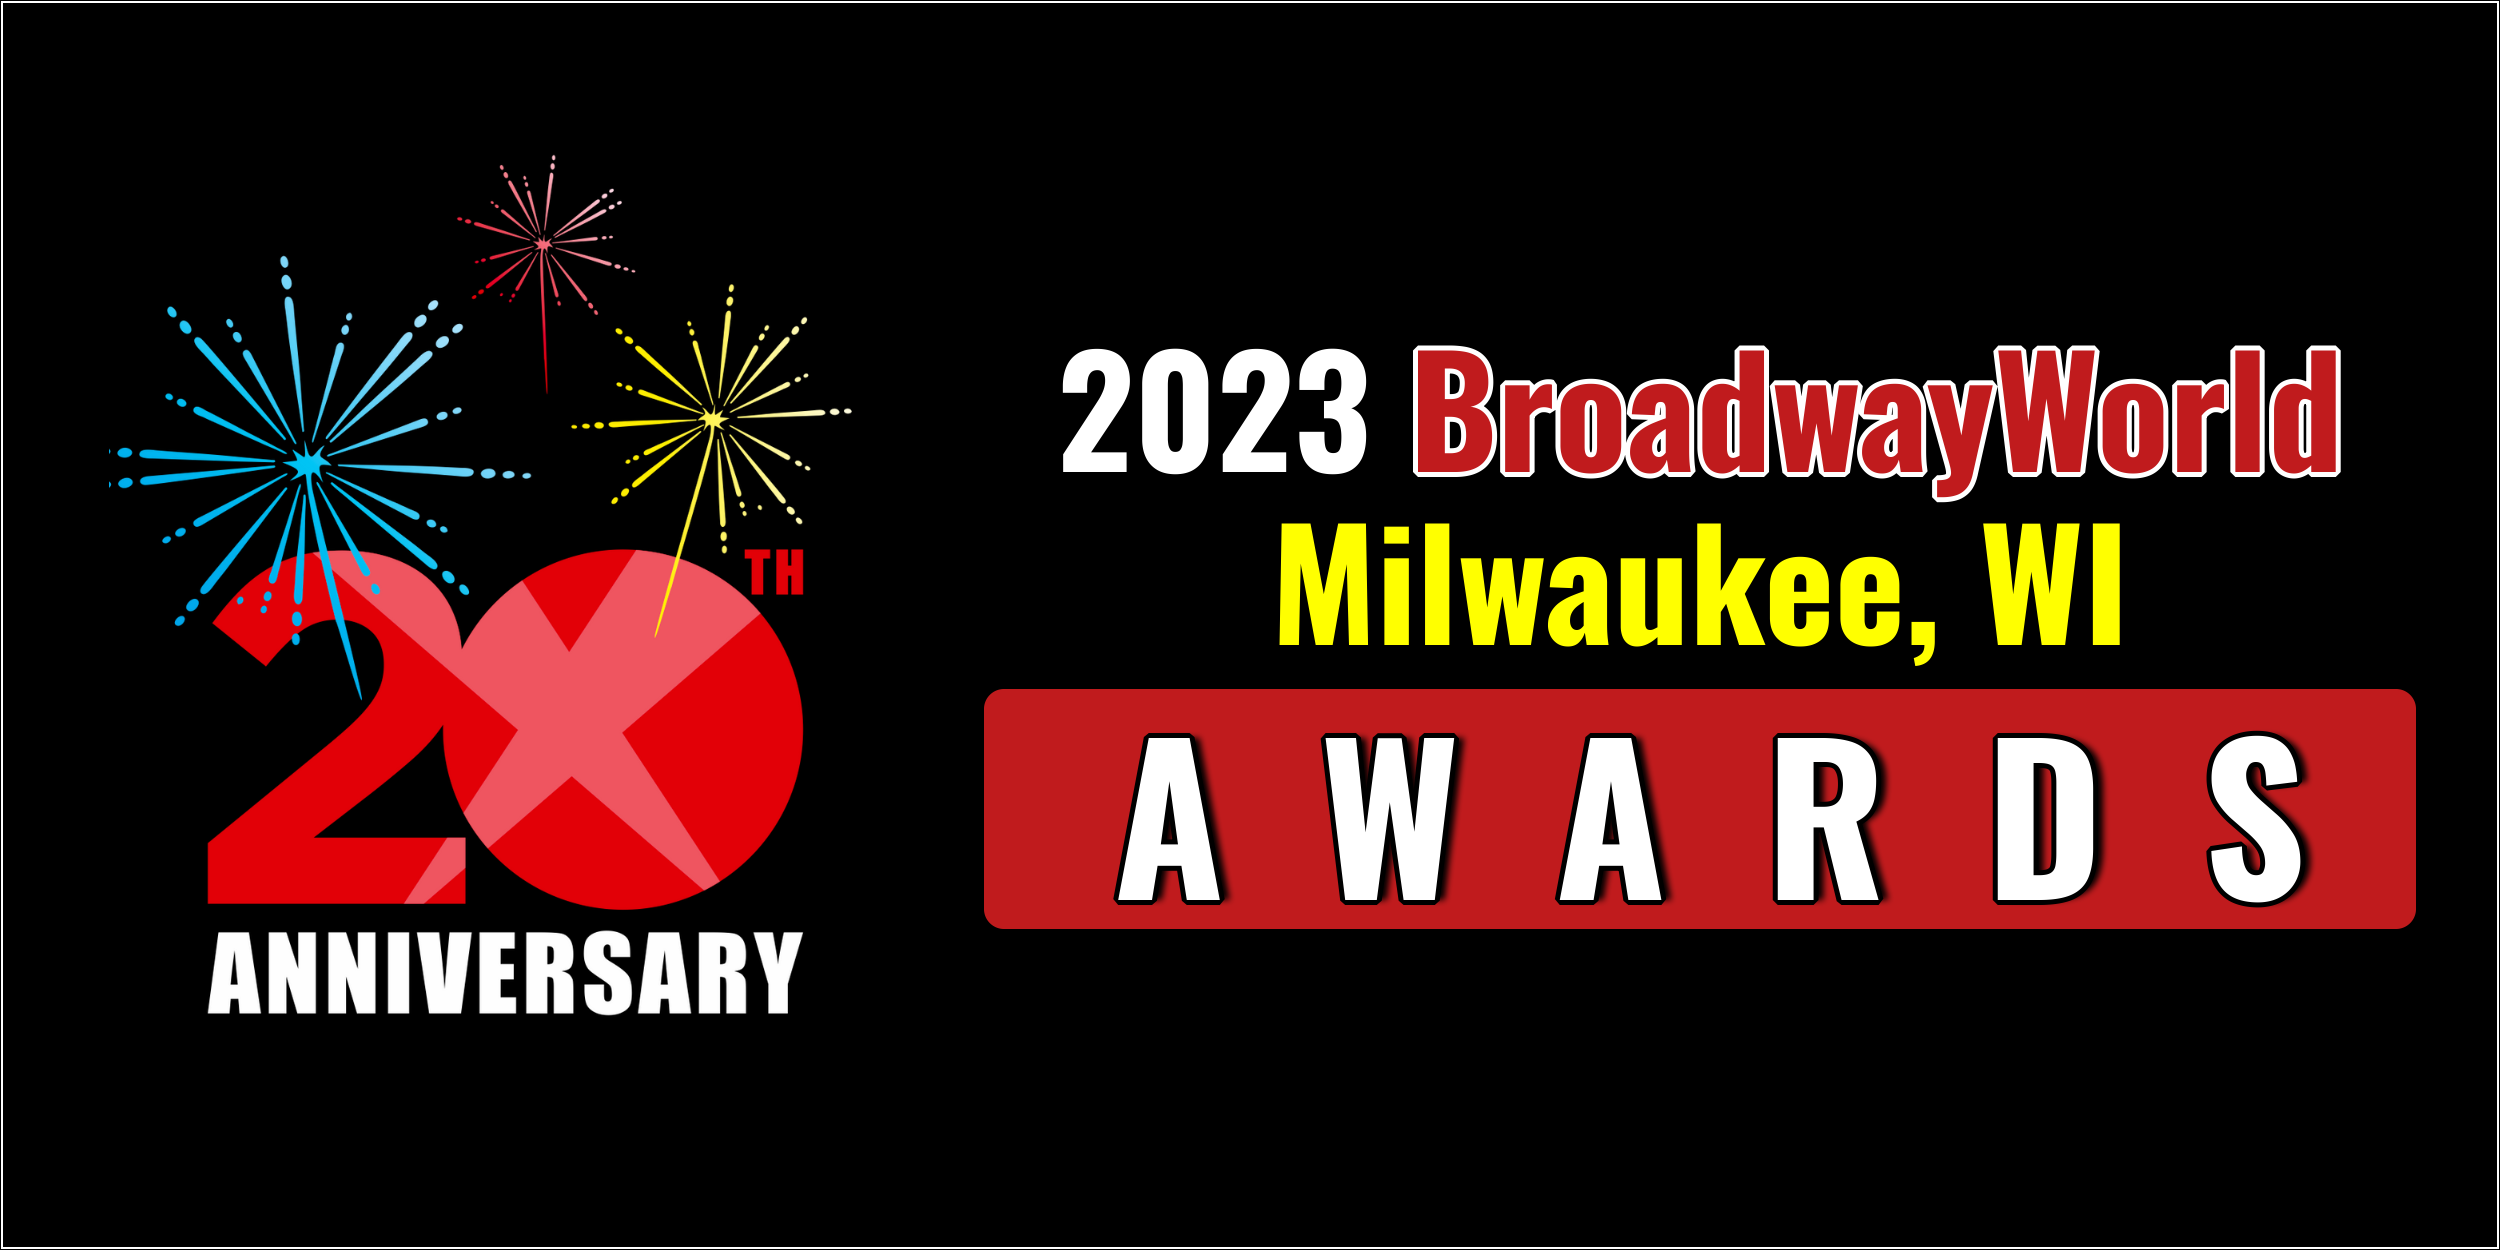 First Standings Announced For The 2023 BroadwayWorld Milwaukee, WI Awards; Lake Country Pl Photo